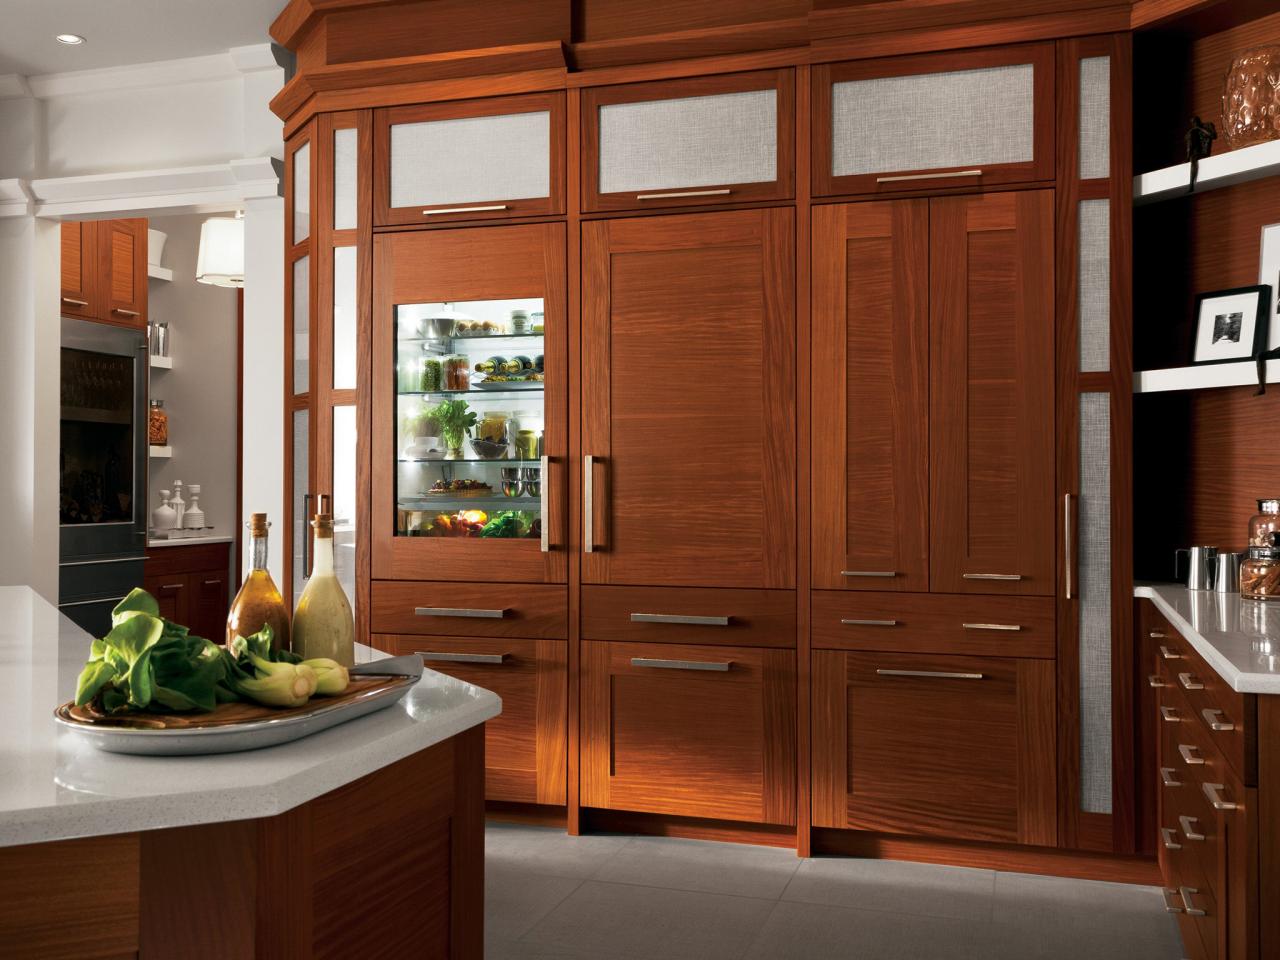 Custom Kitchen Cabinets Pictures, What Is The Least Expensive Wood For Cabinets